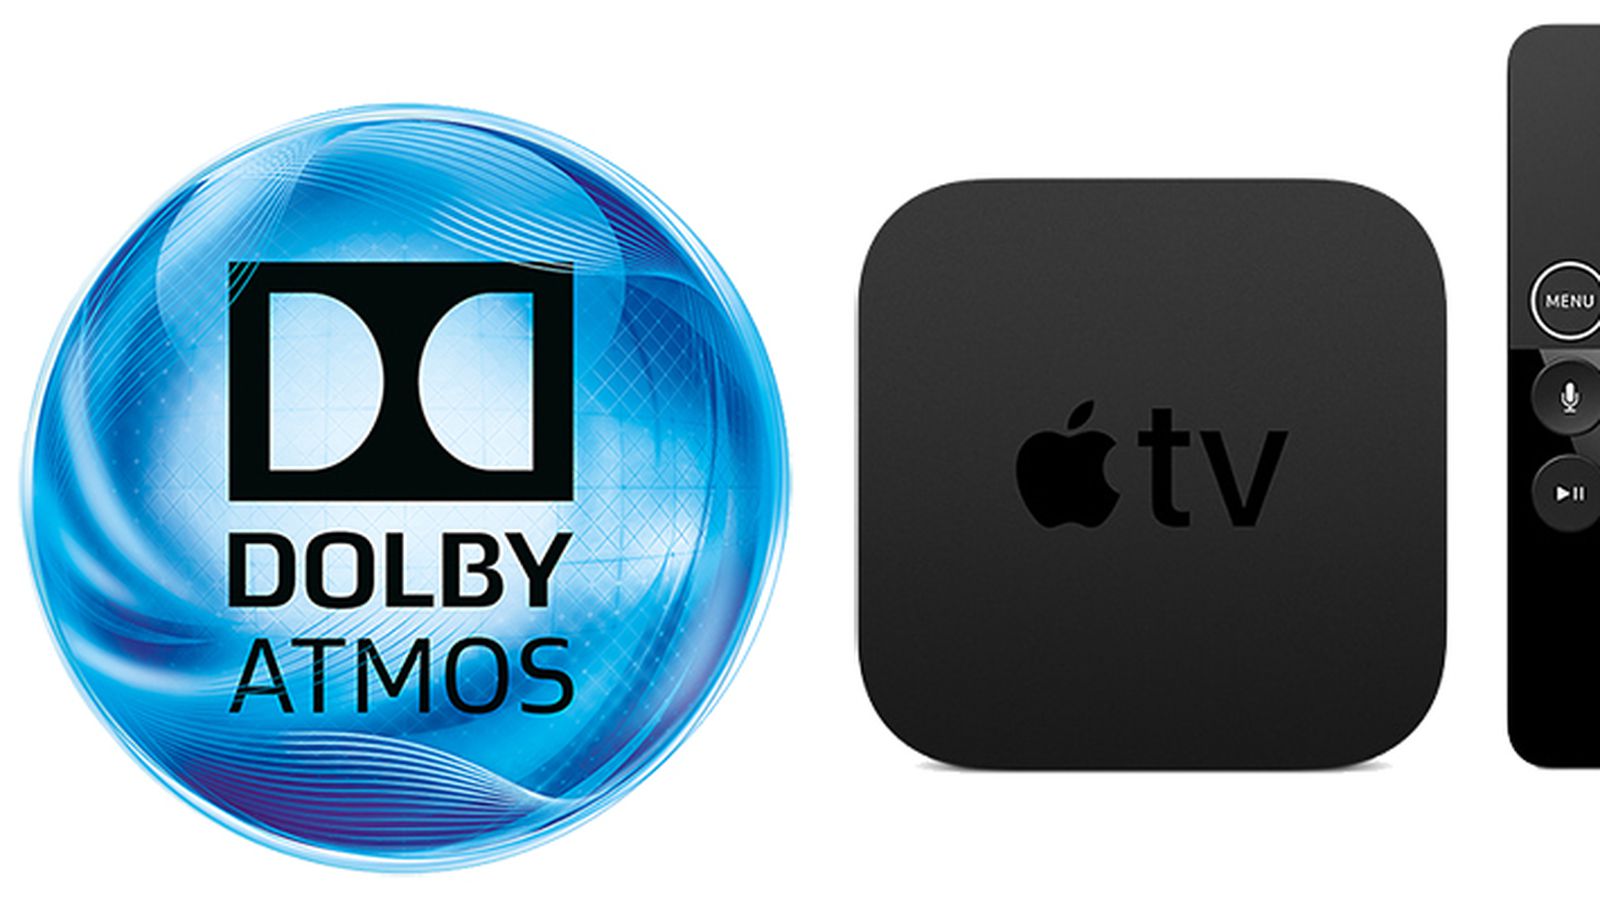 Apple TV Will Gain Dolby Atmos Support in Future tvOS Update -